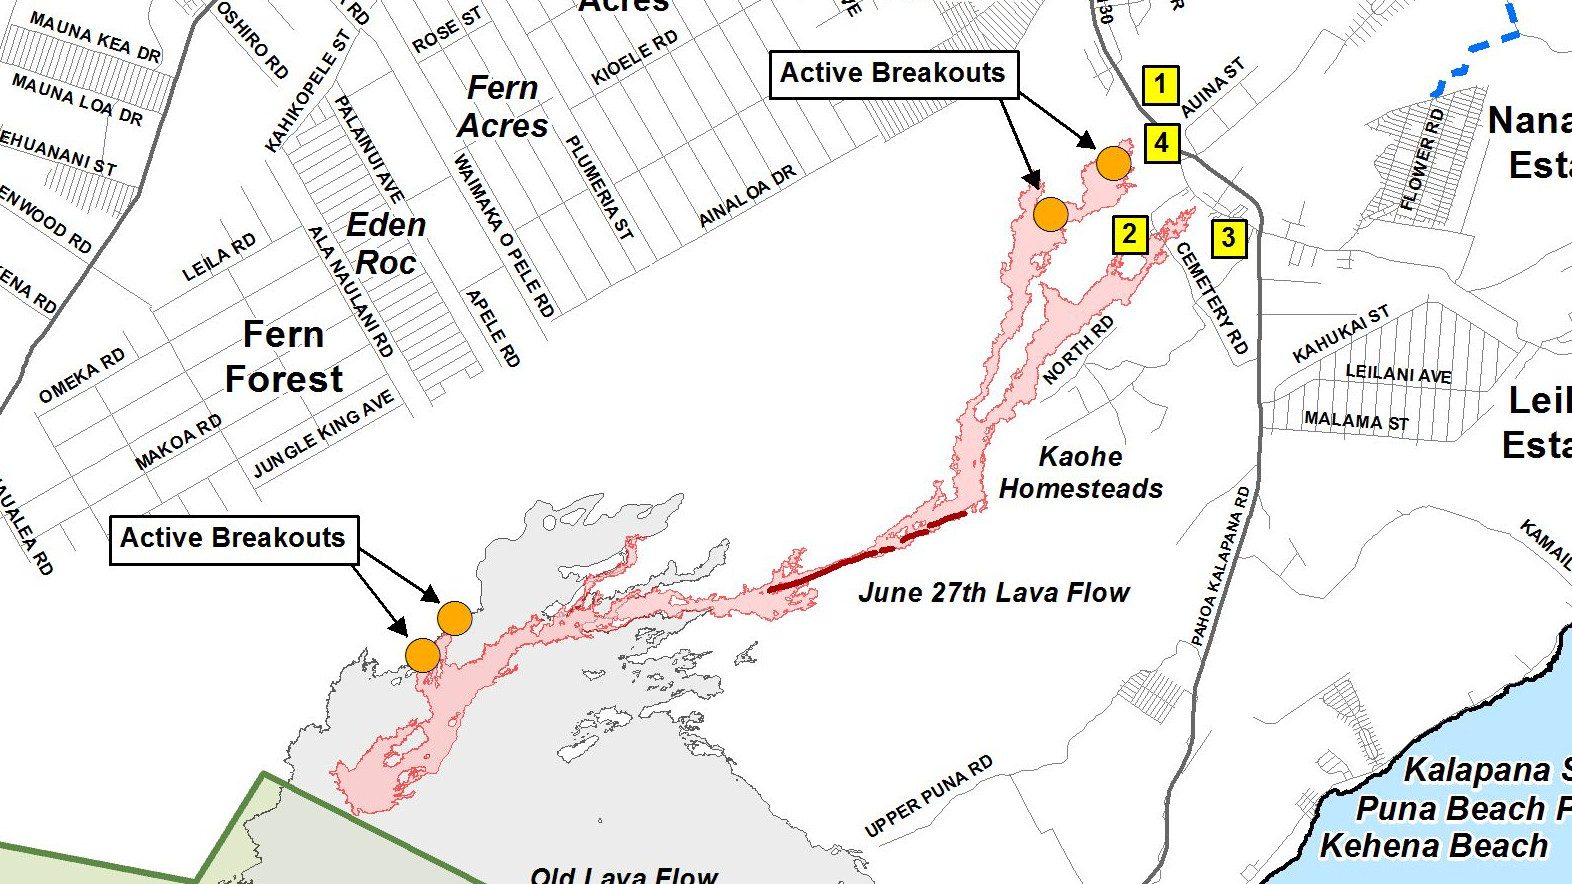 Inset from today's Civil Defense Overview Lava Flow Map - Updated Wednesday, 2/11/15 at 7:00 am